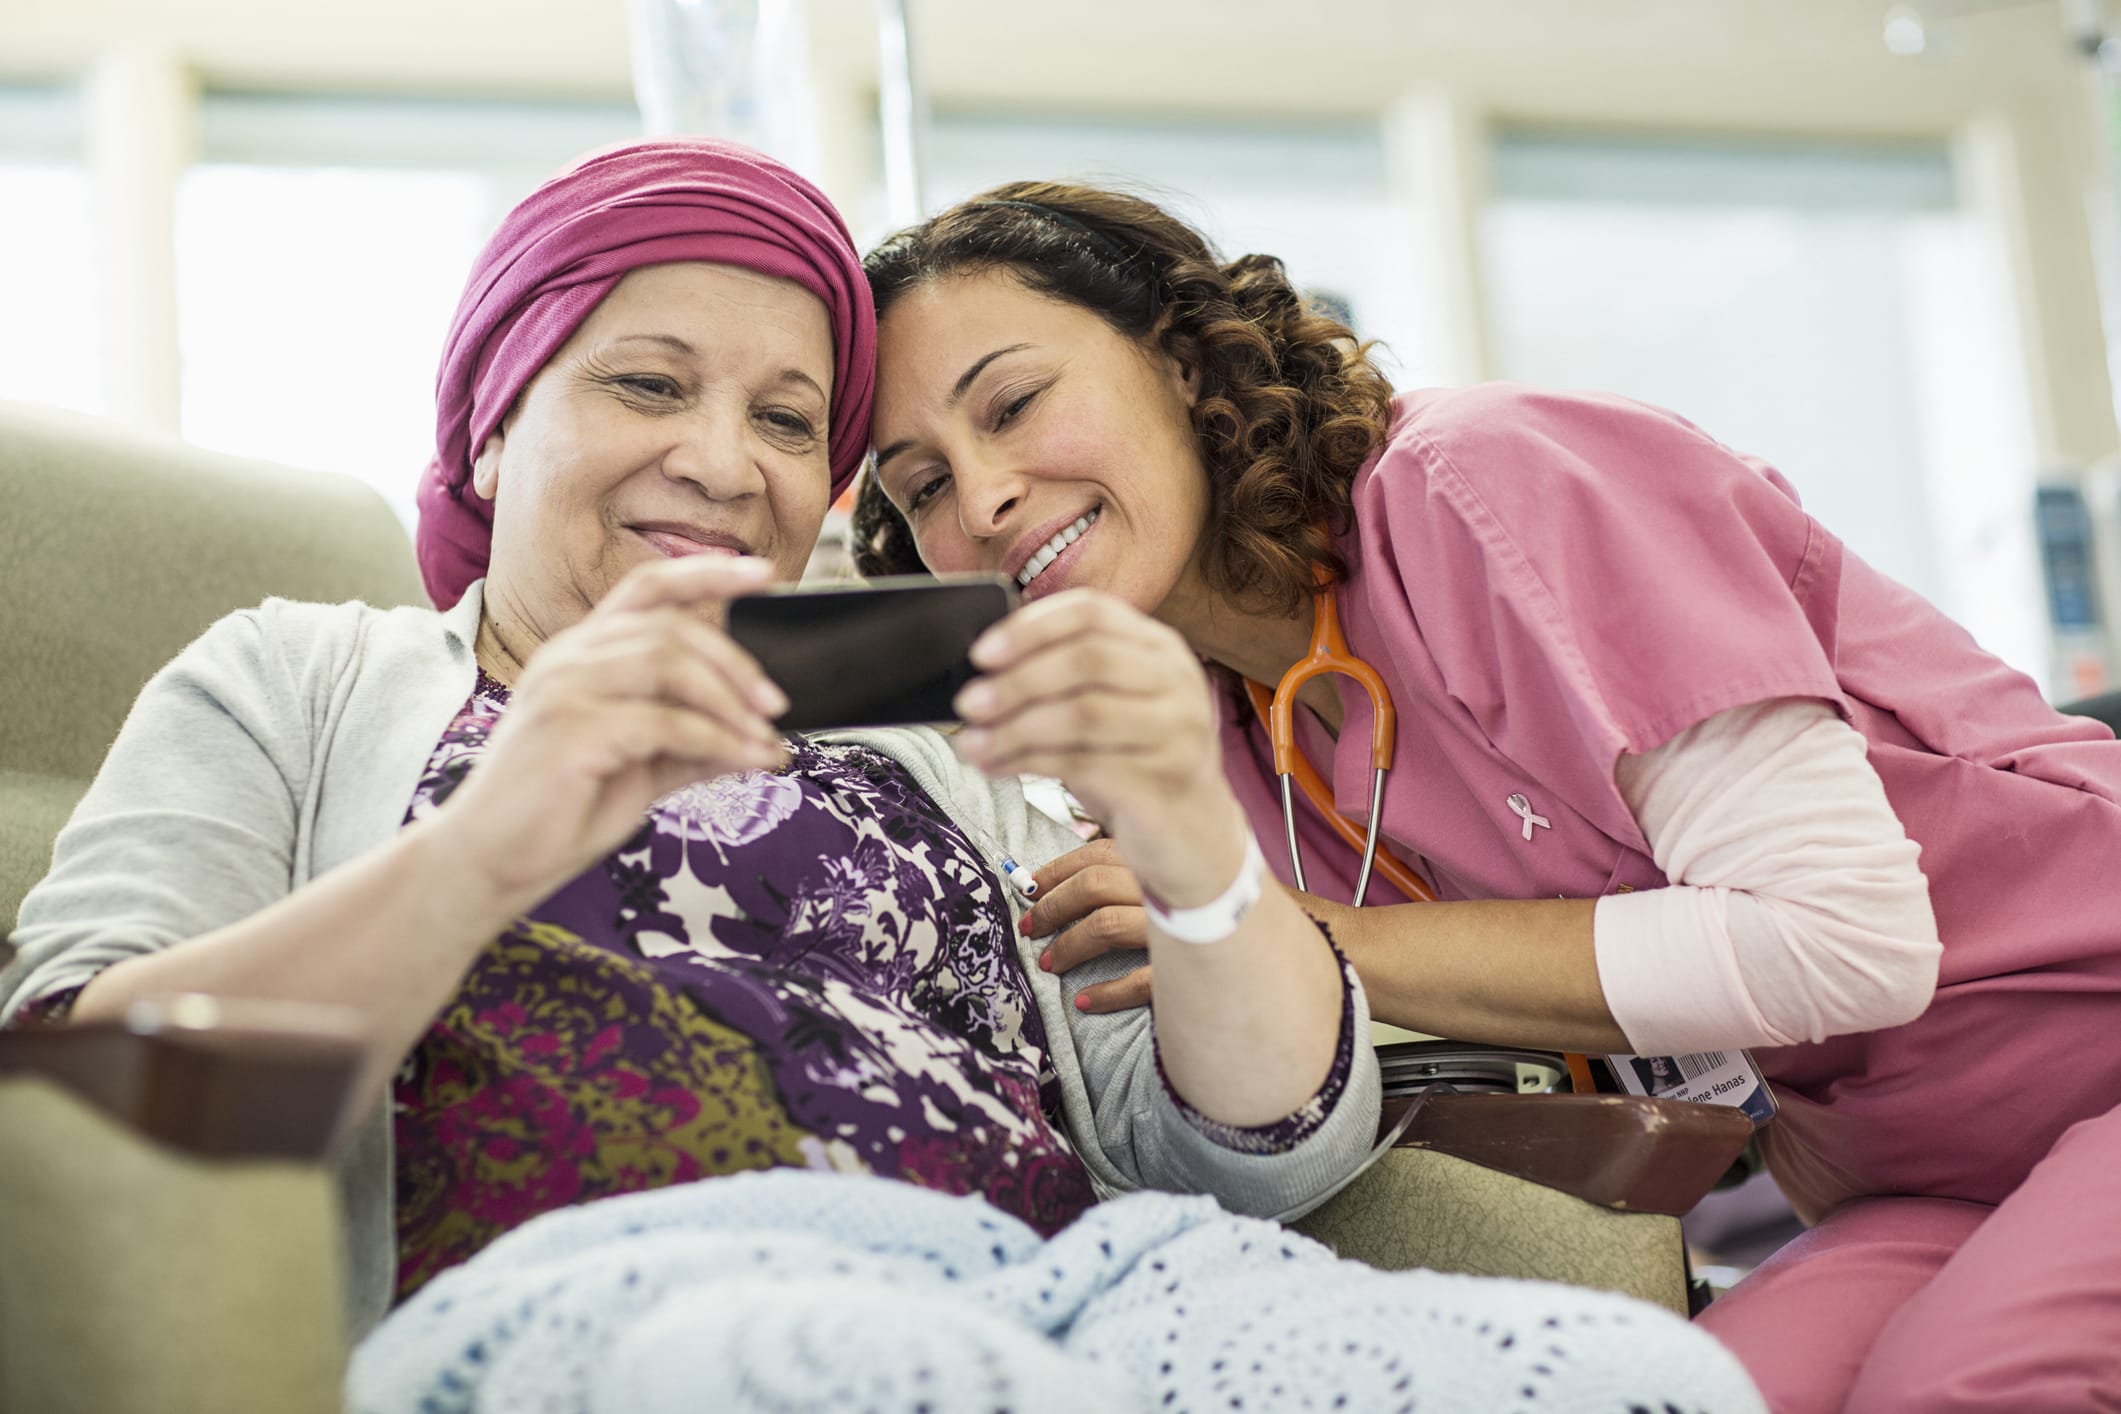 A patient receiving chemotherapy and a cancer treatment specialist smile as they look at photos on a phone together 